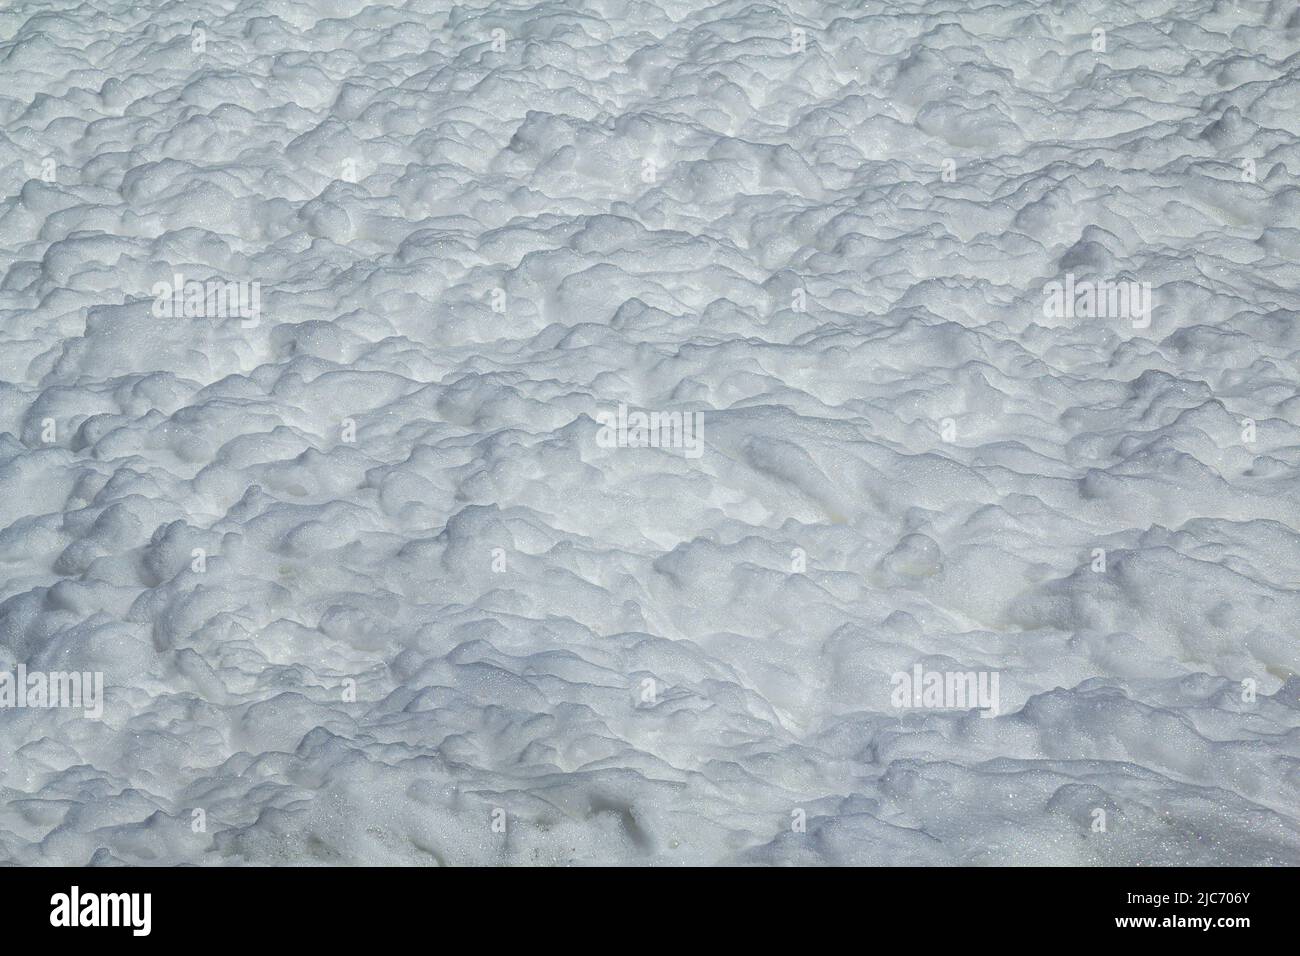 Background in the form of a large surface filled with white foam. Stock Photo